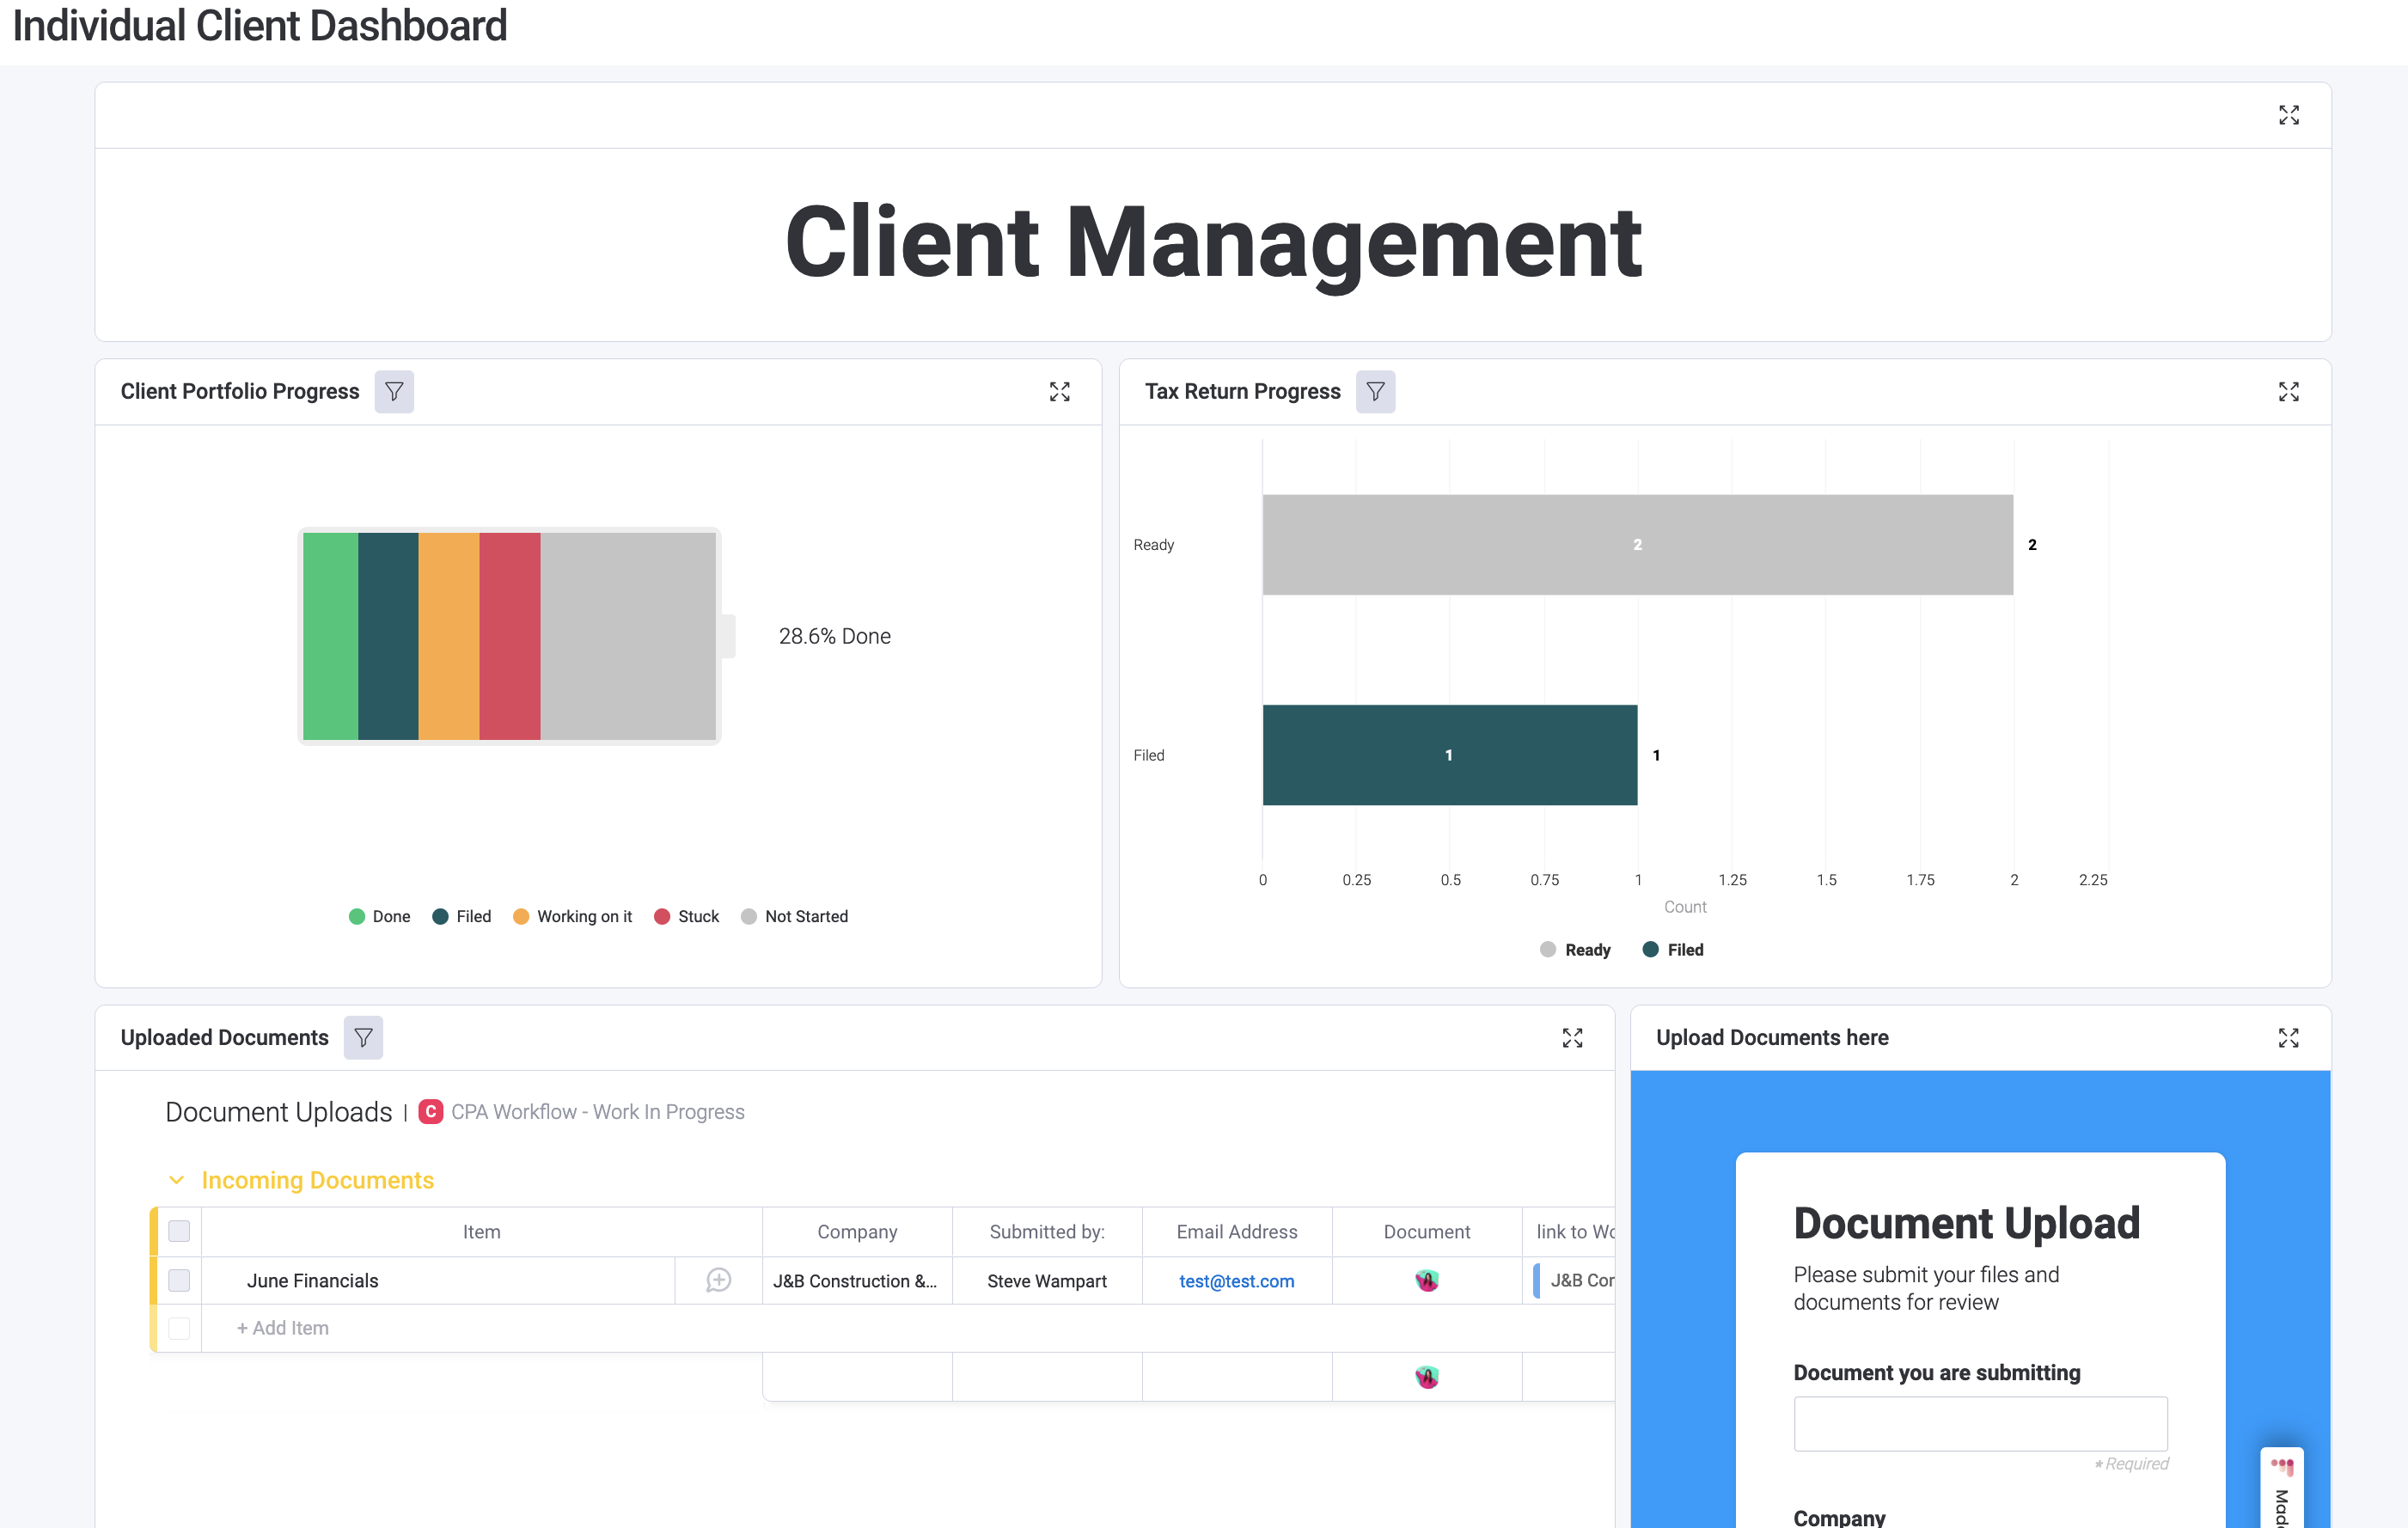 Manage individual clients